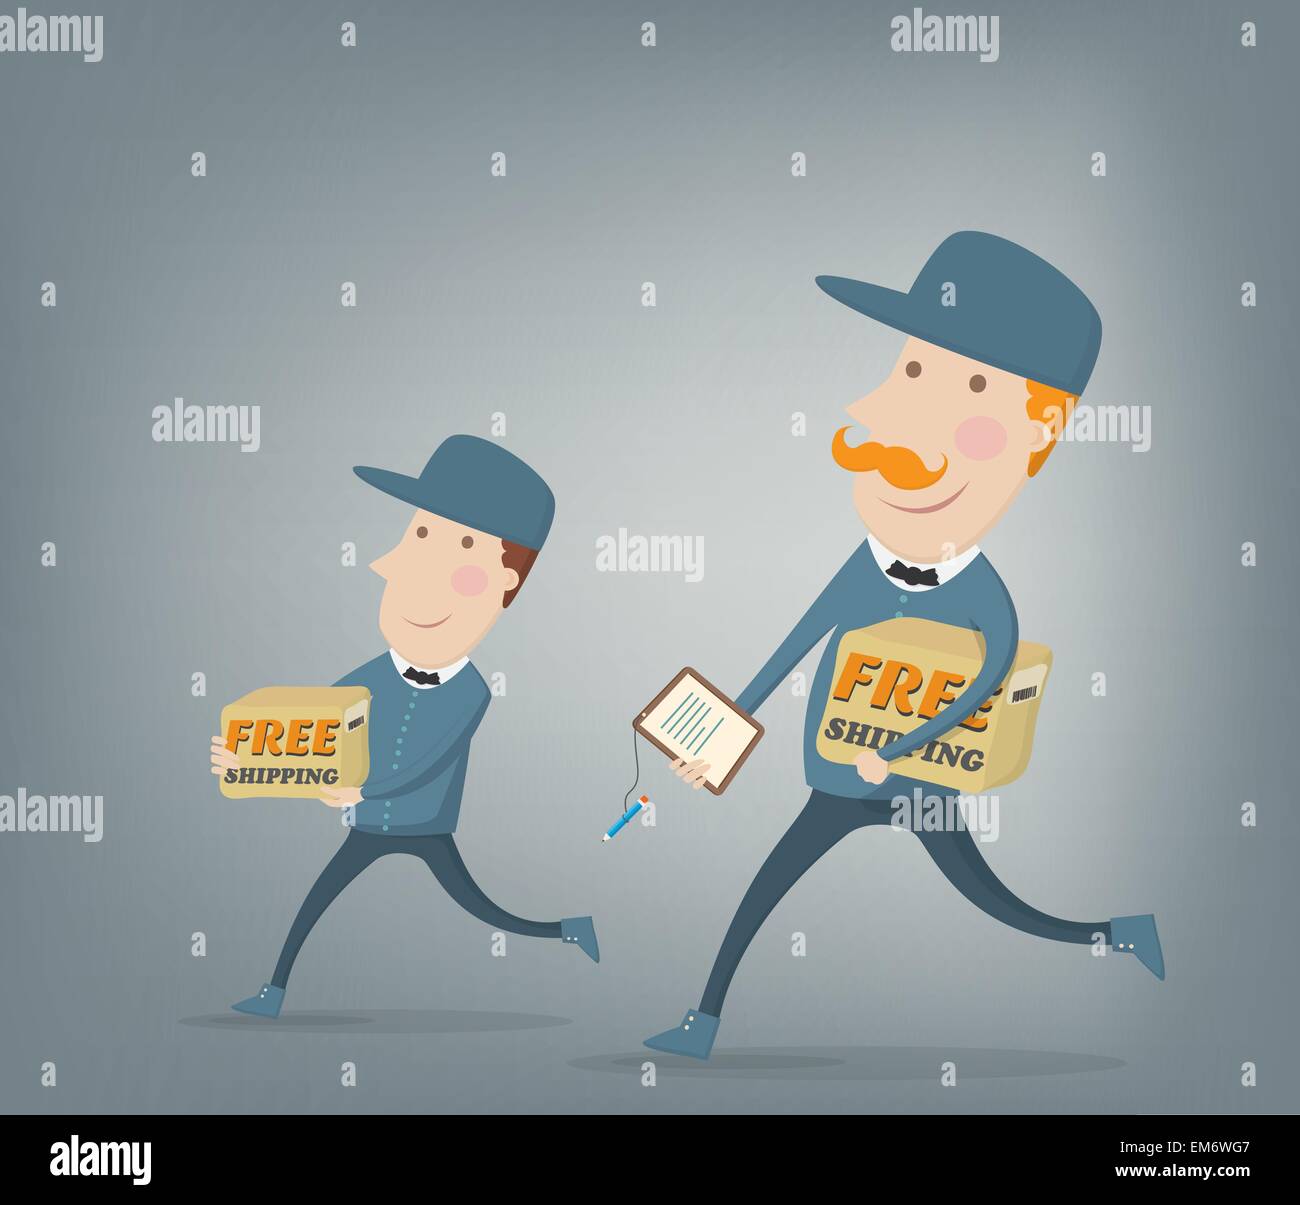 Free shipping. Two couriers delivering  packages shipped for free Stock Vector